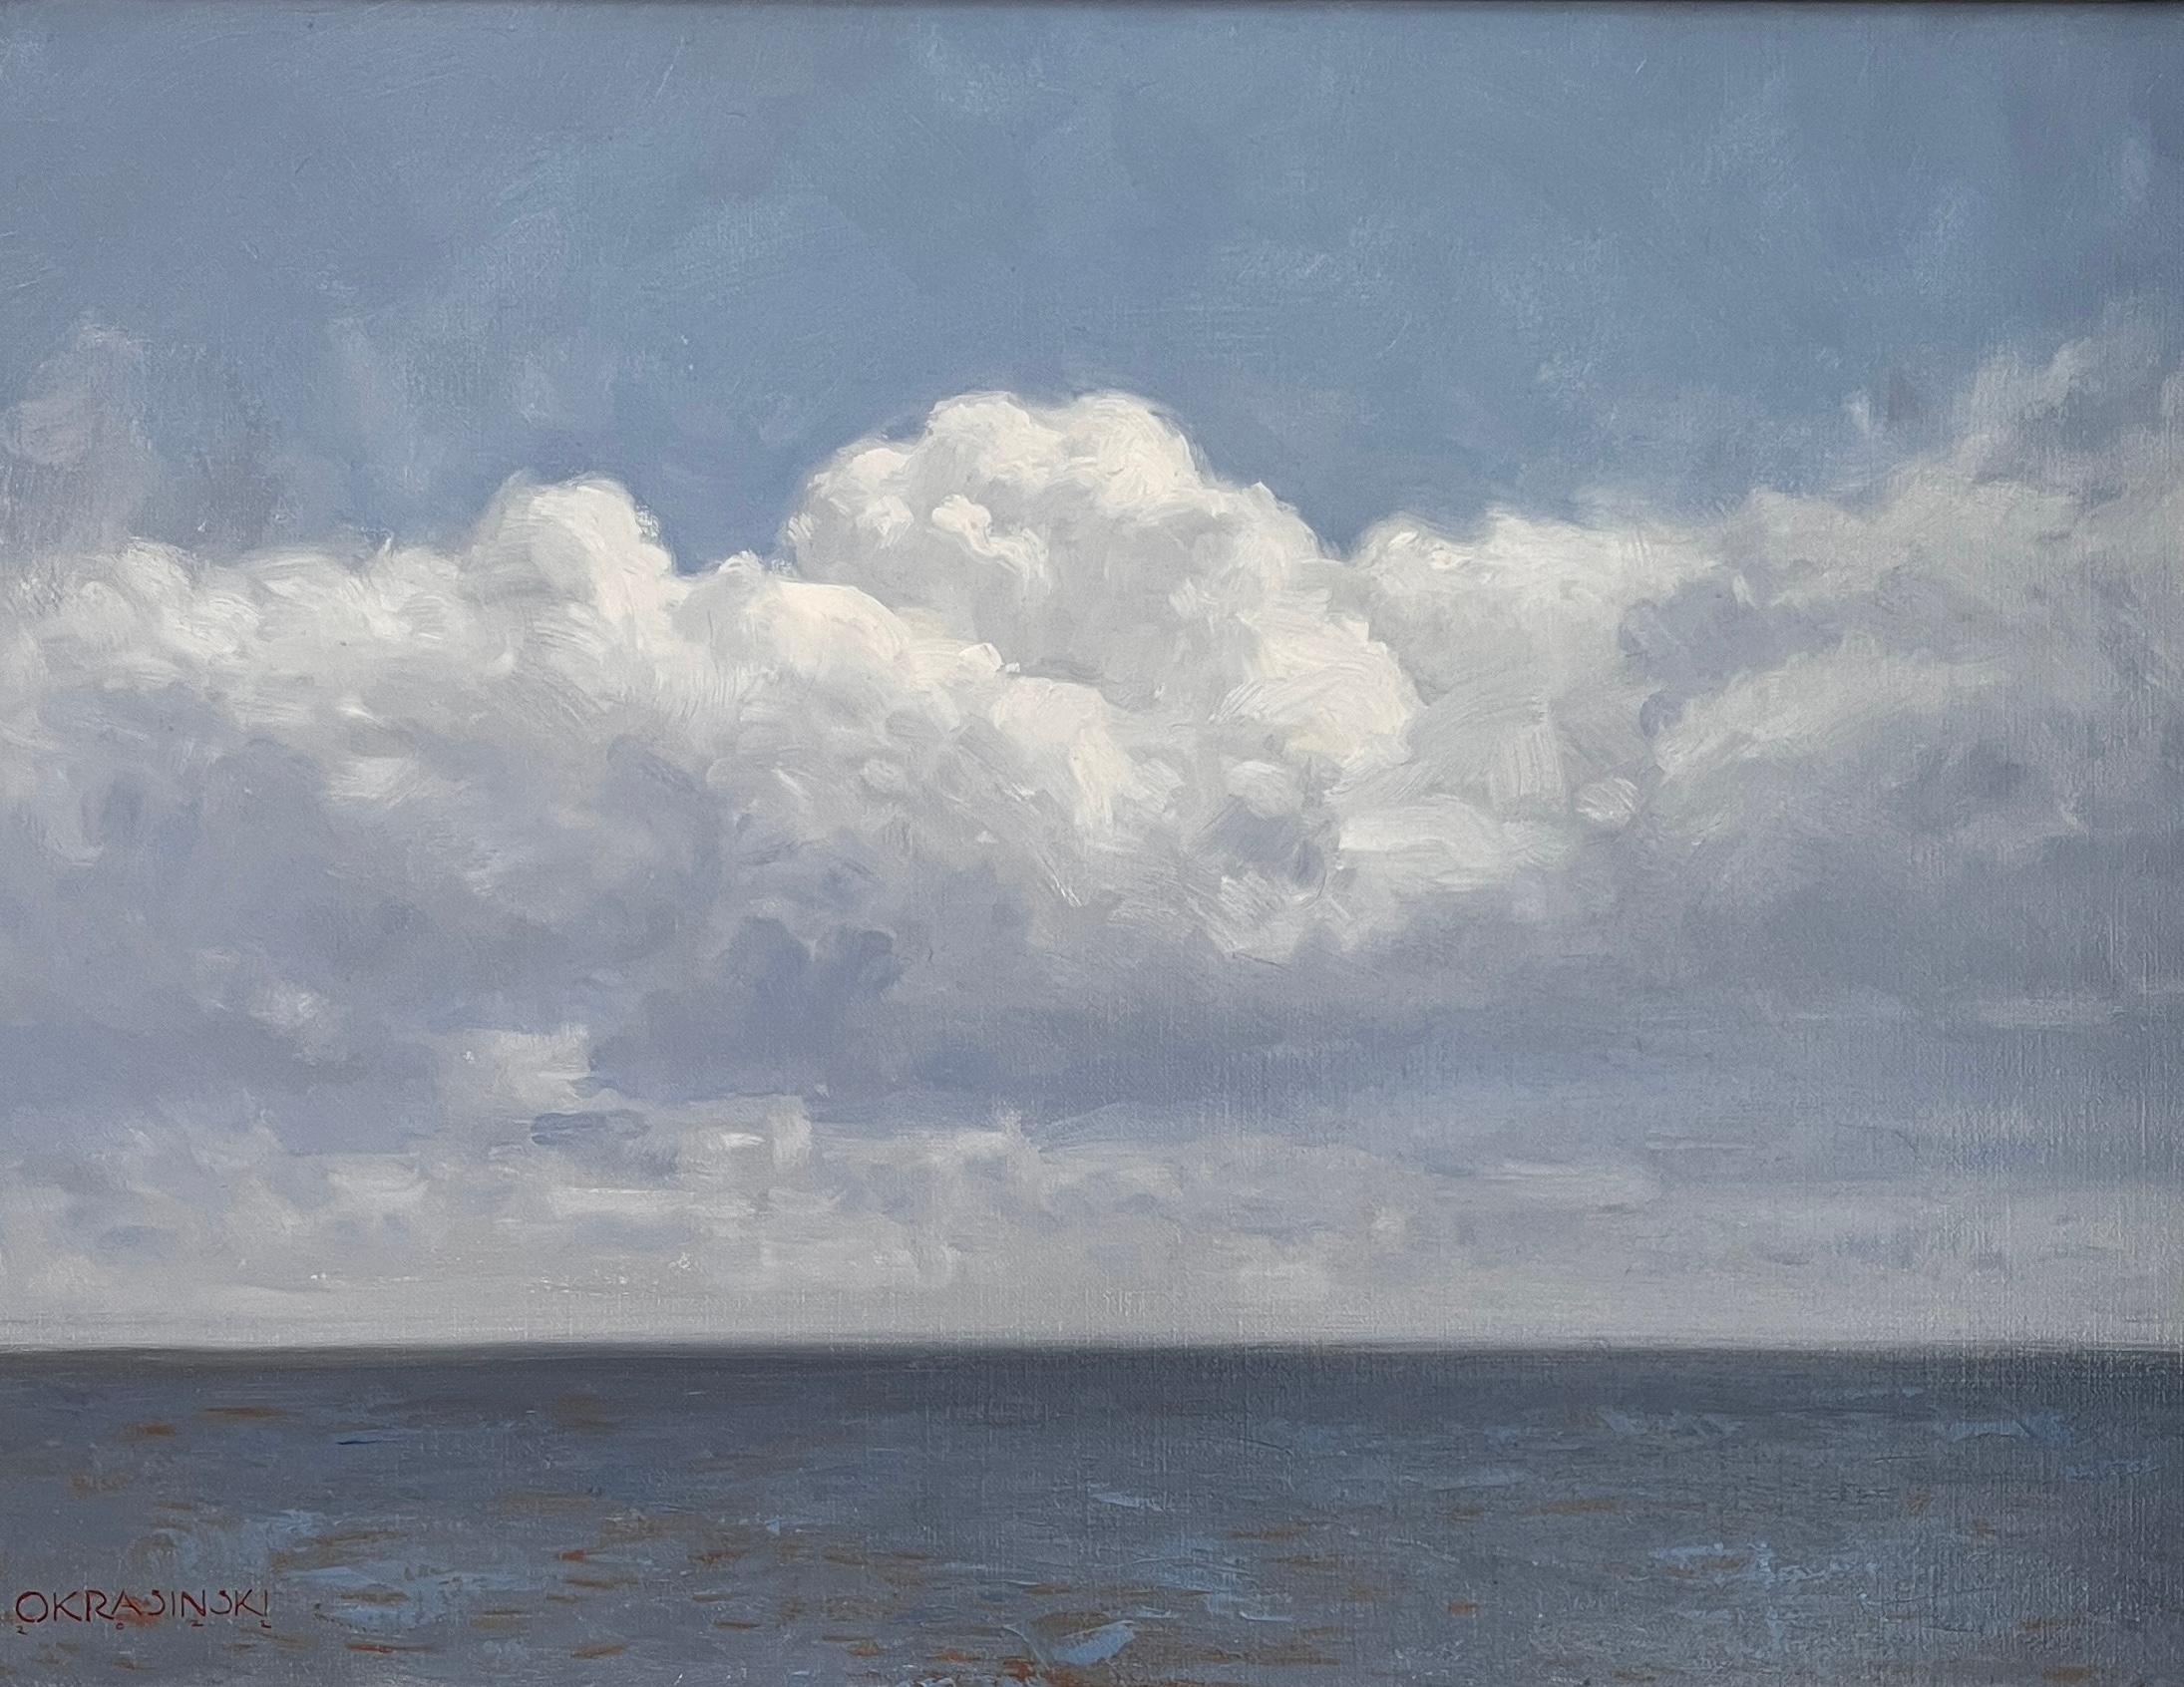 Clouds Over the Sea - Painting by Patrick Okrasinski